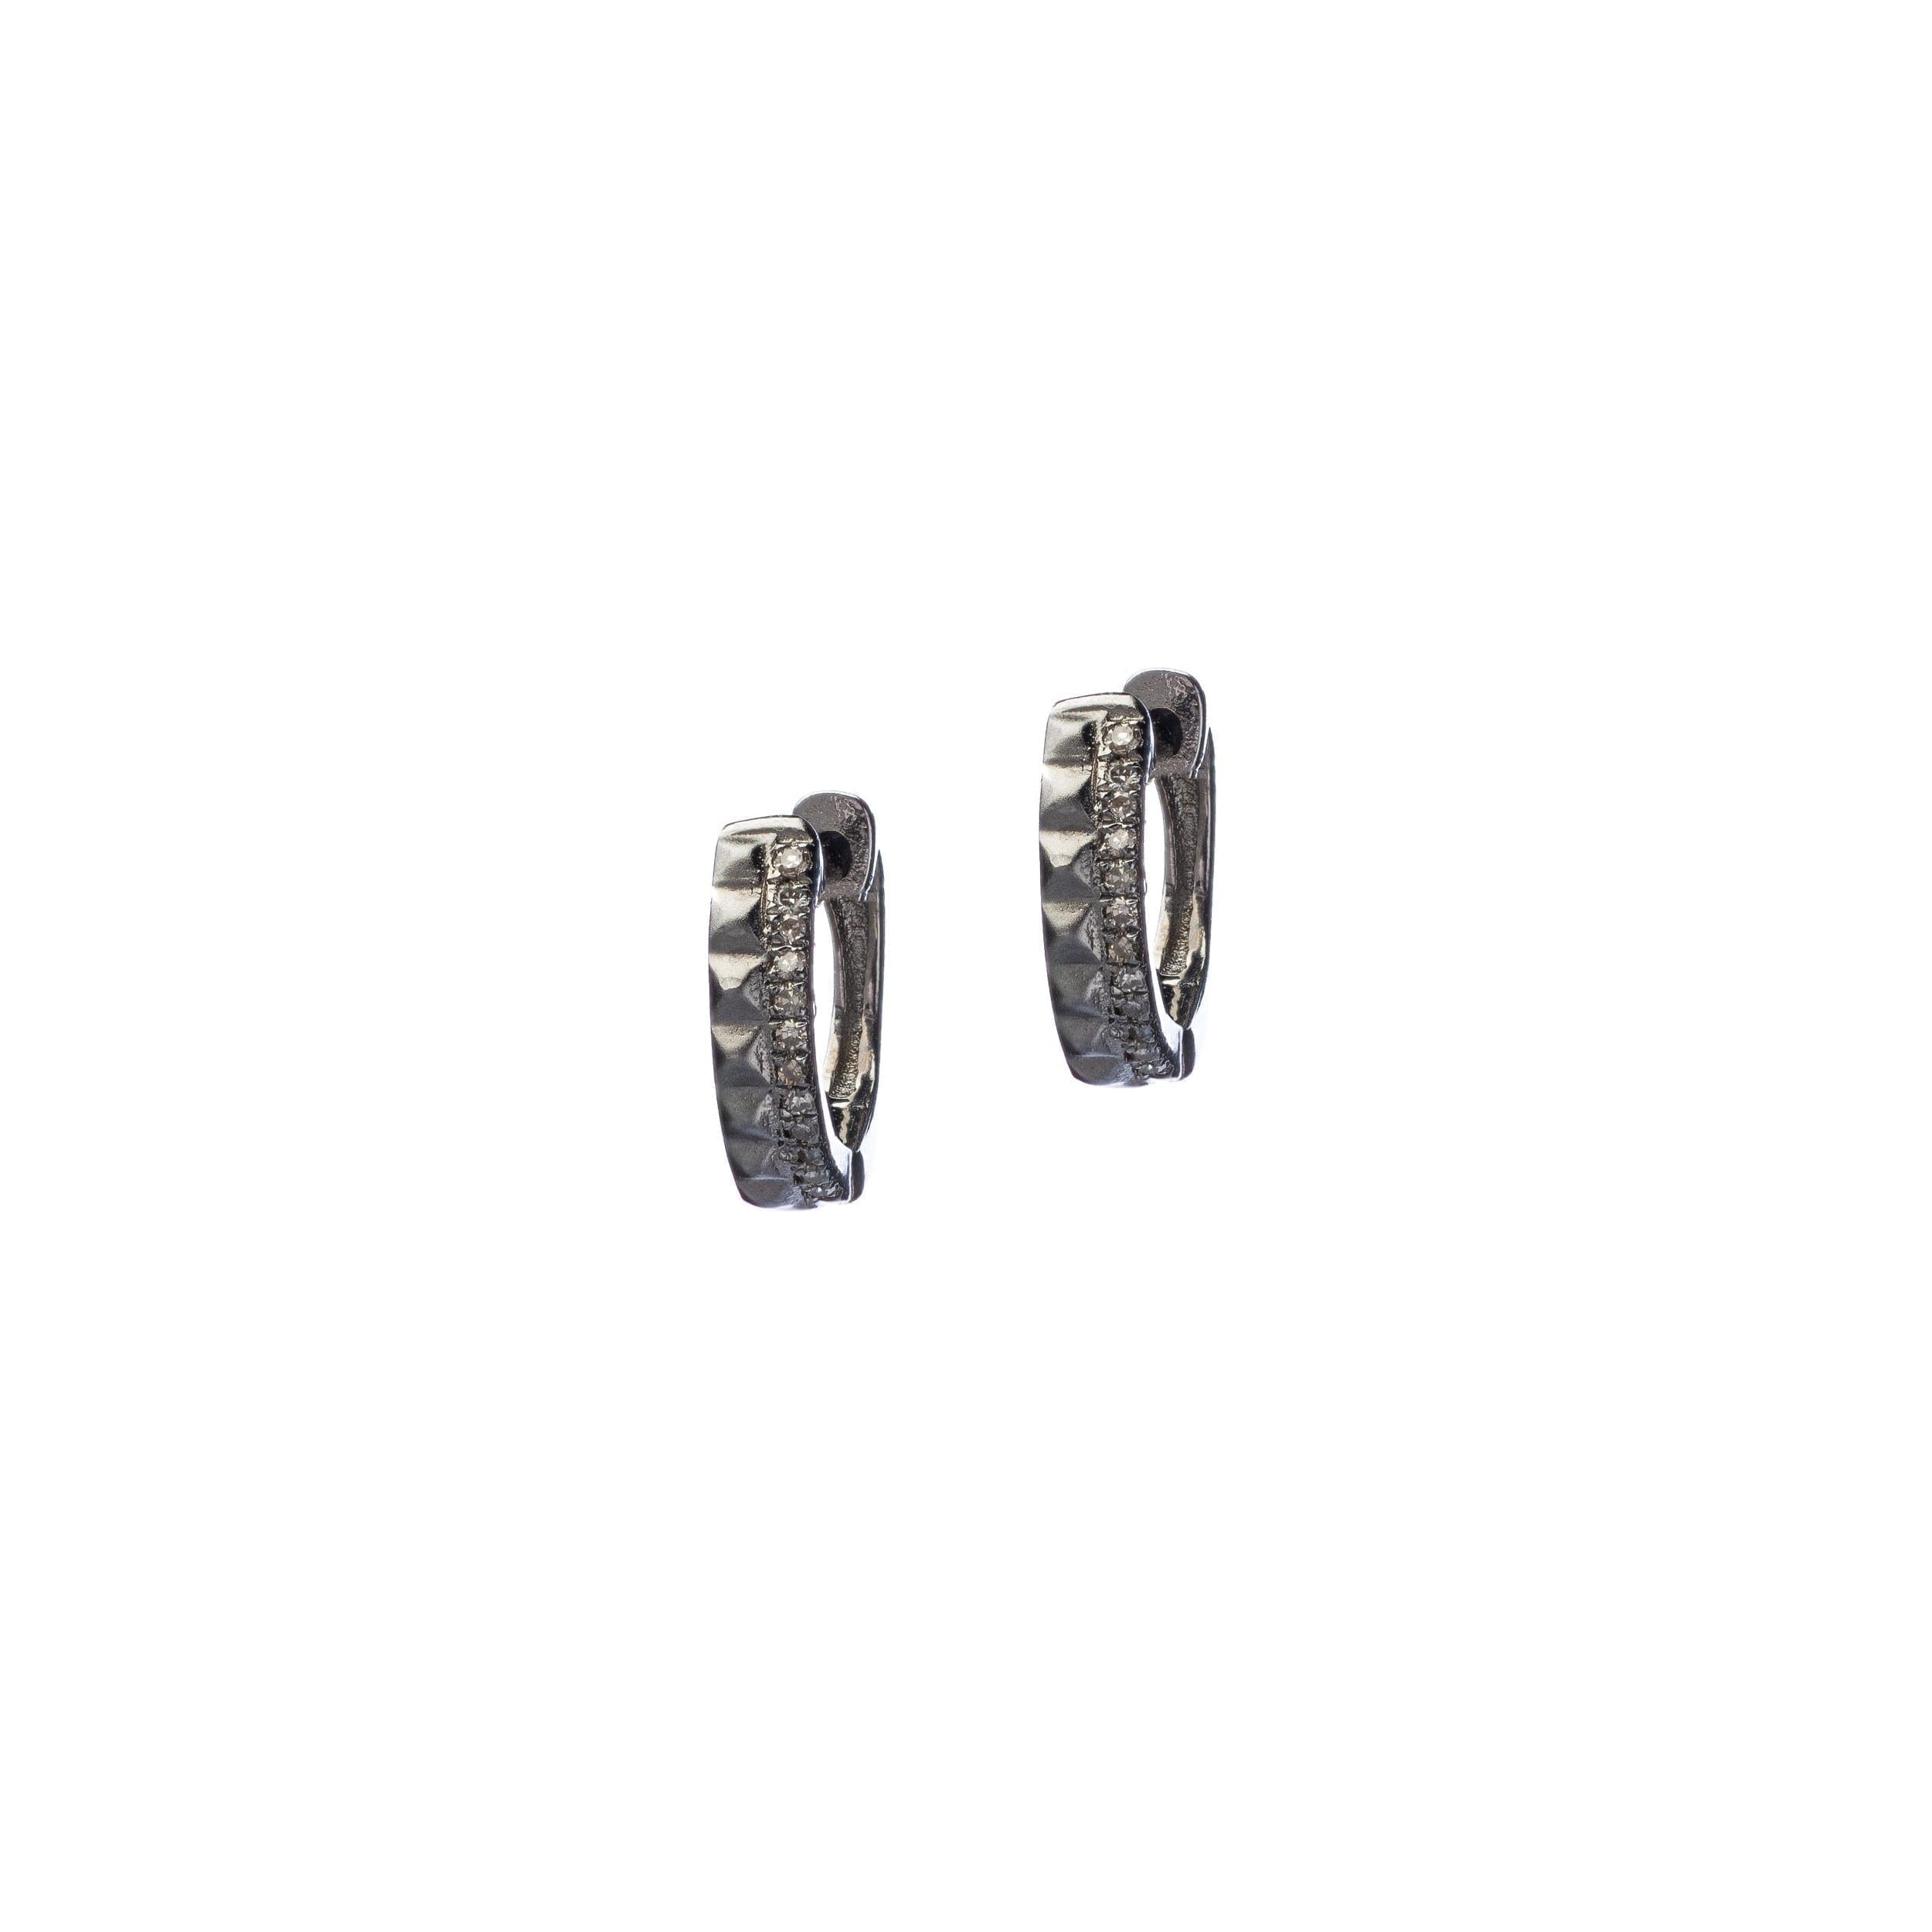 Studded Huggie Earrings with Diamonds Sterling Silver